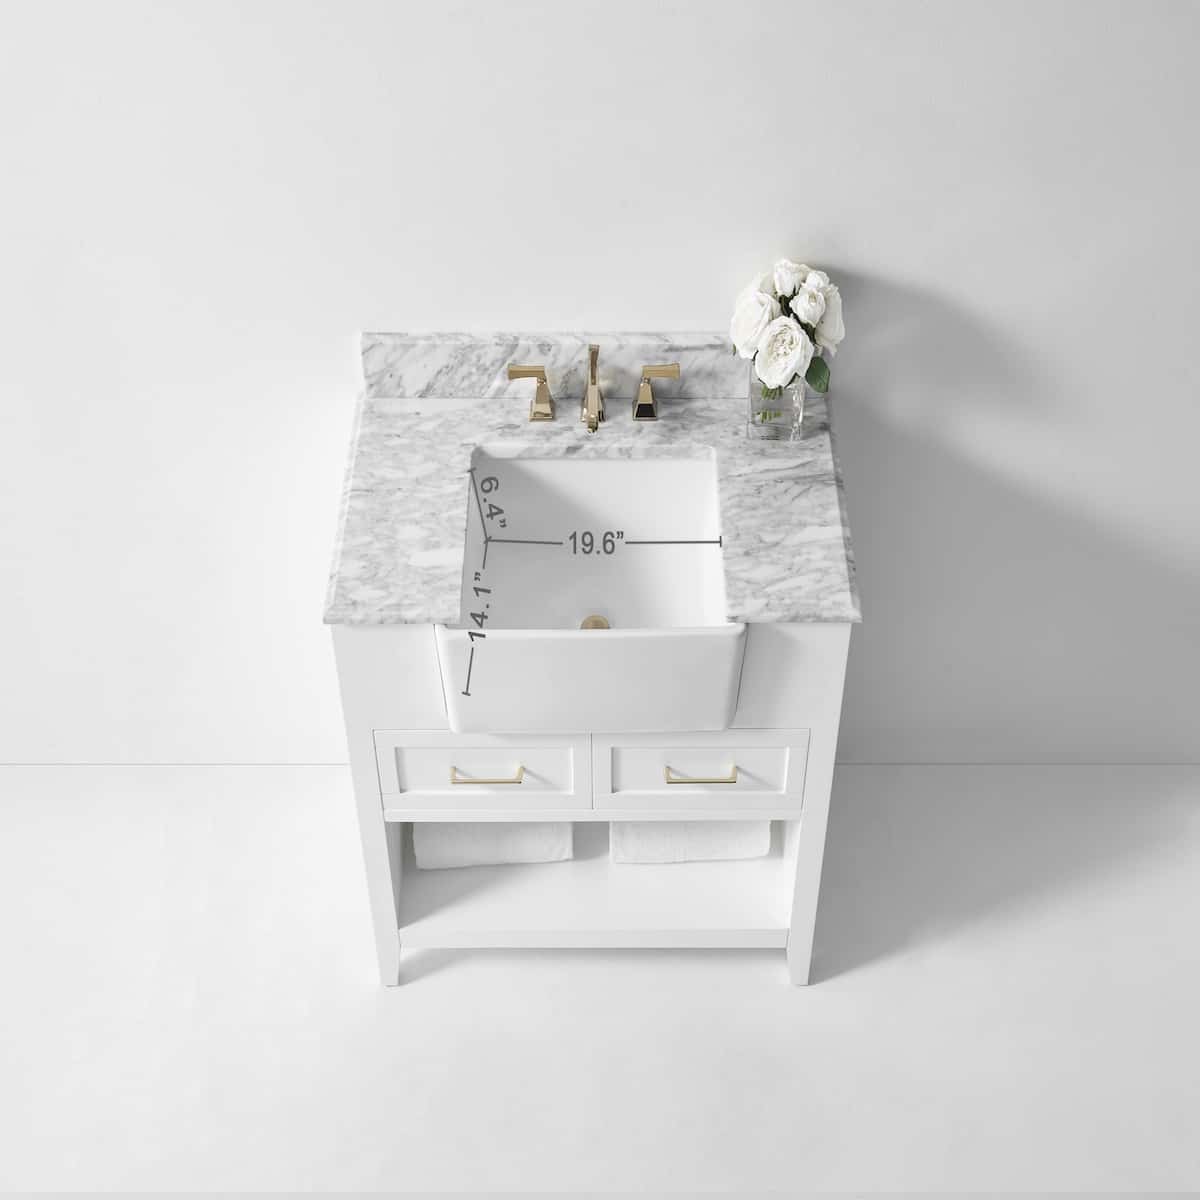 Ancerre Designs Hayley 36" White Single Vanity Sink Dimensions VTS-HAYLEY-36-W-CW #finish_white